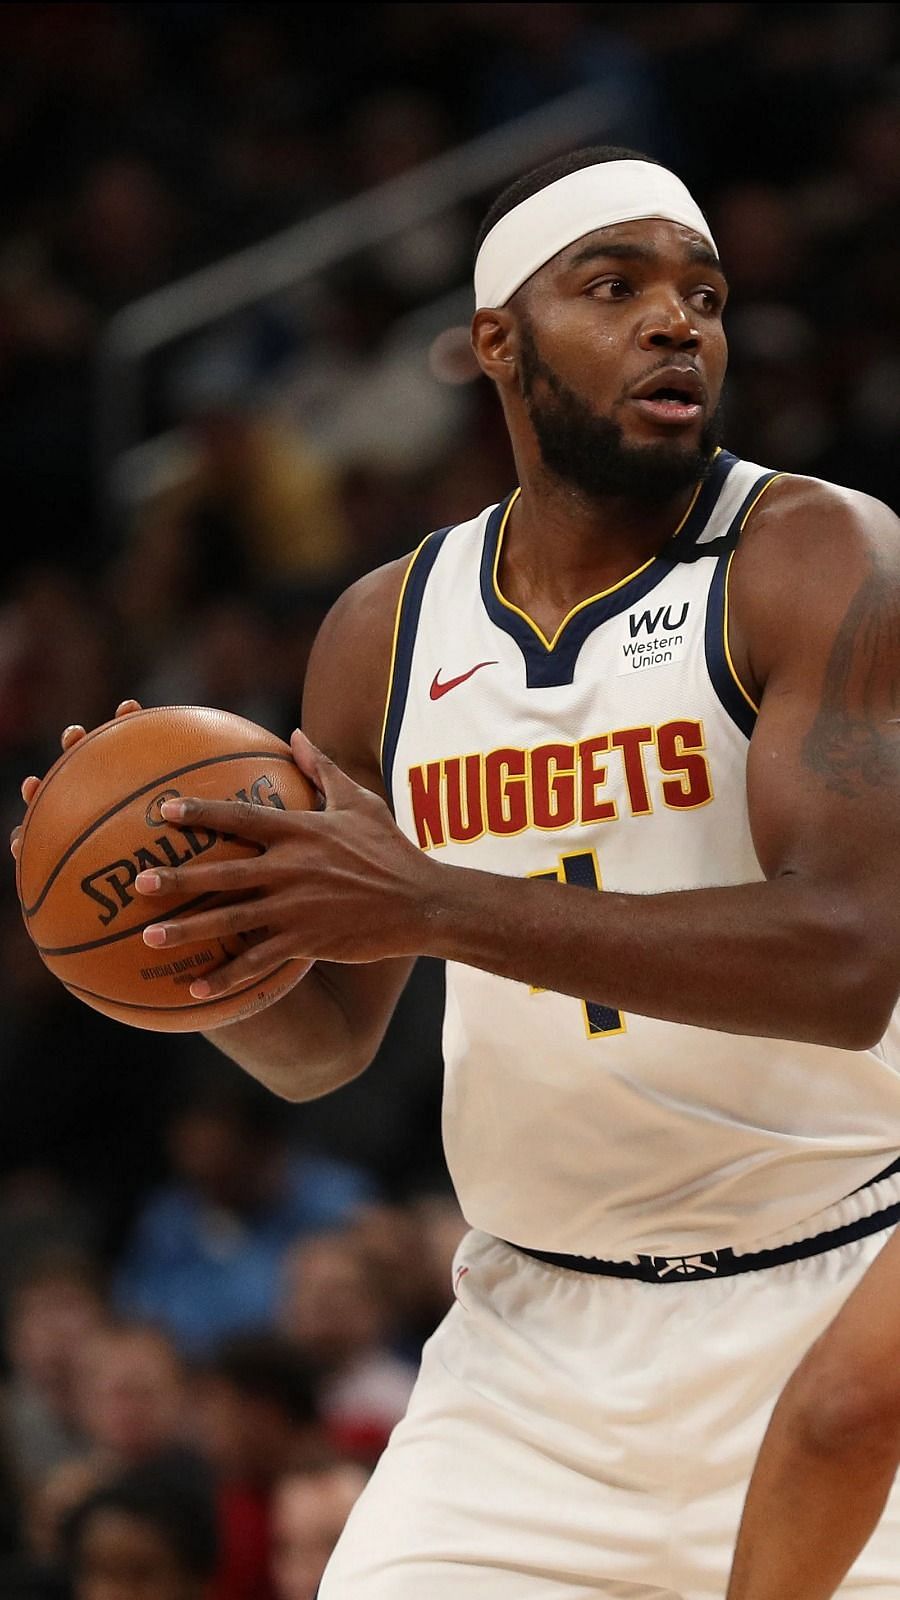 Nba Rumors Roundup Golden State Warriors Hoping To Sign Paul Millsap Josh Richardson Signs One Year Extension With Boston Celtics And More August 23 21